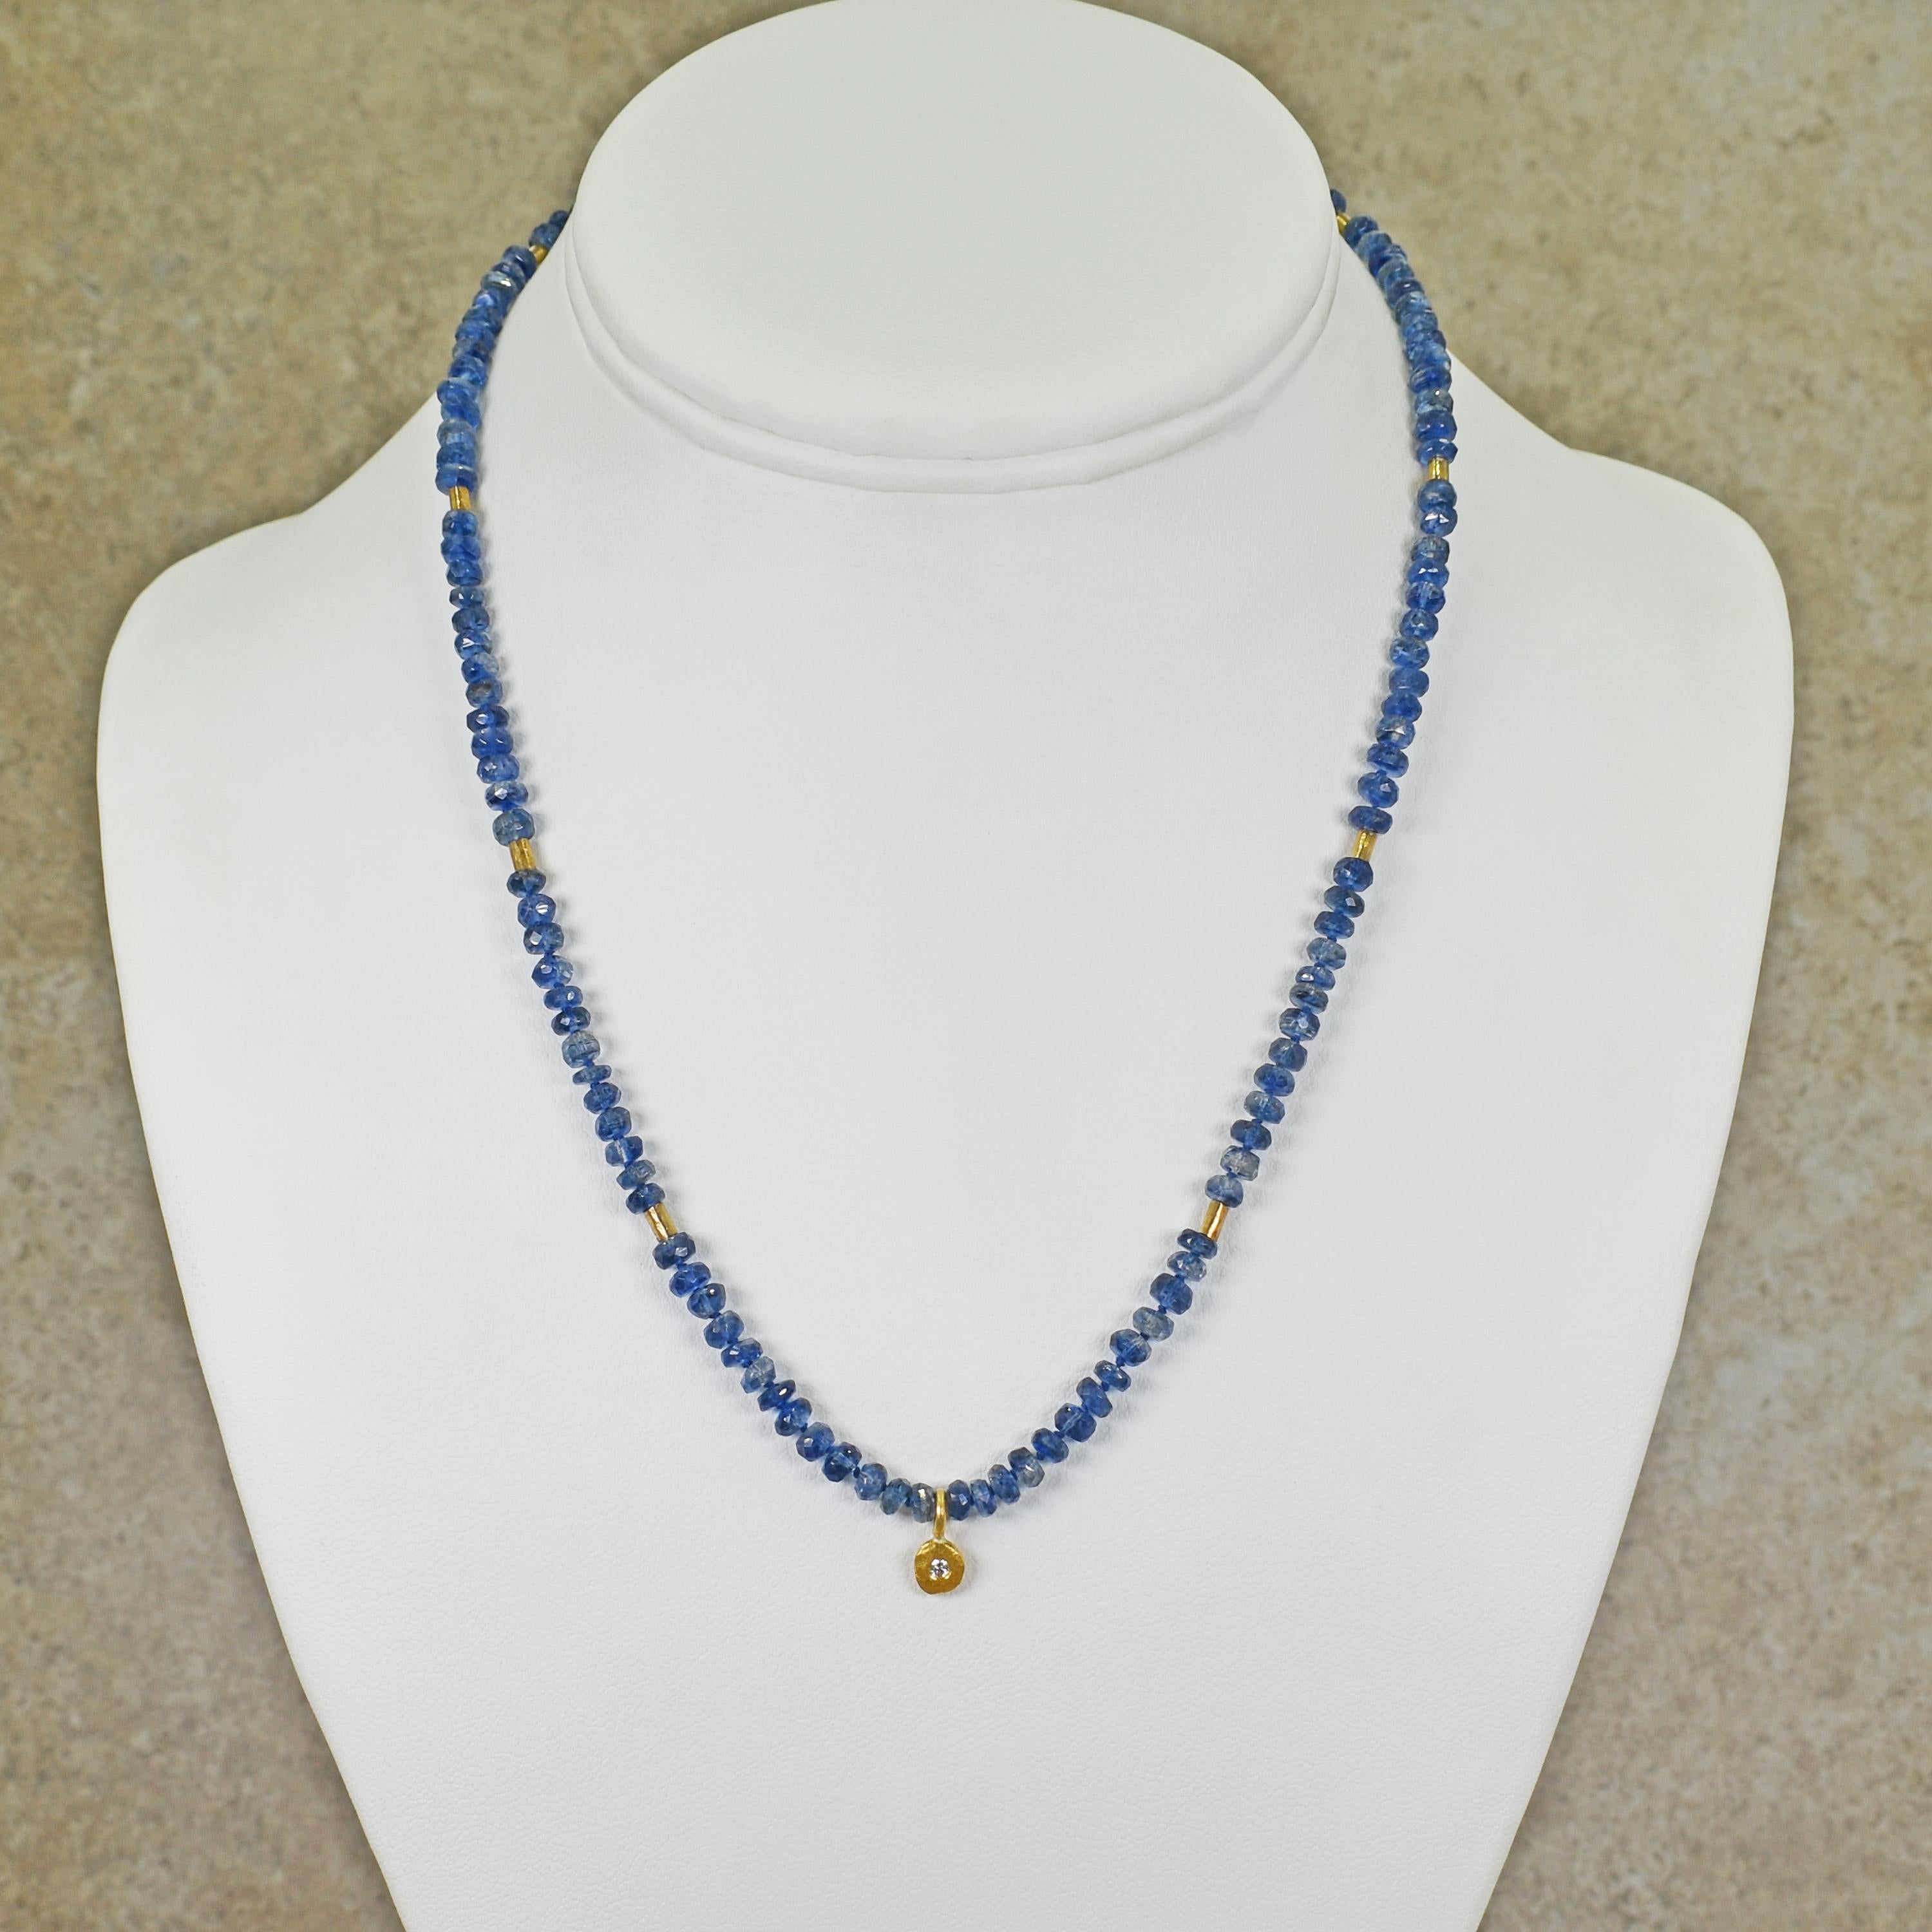 Beautiful blue faceted Kyanite beads, 22k yellow gold tube spacer beads, and a 22k gold and white, round Diamond pendant charm. Beaded necklace is 17.5 inches in length.